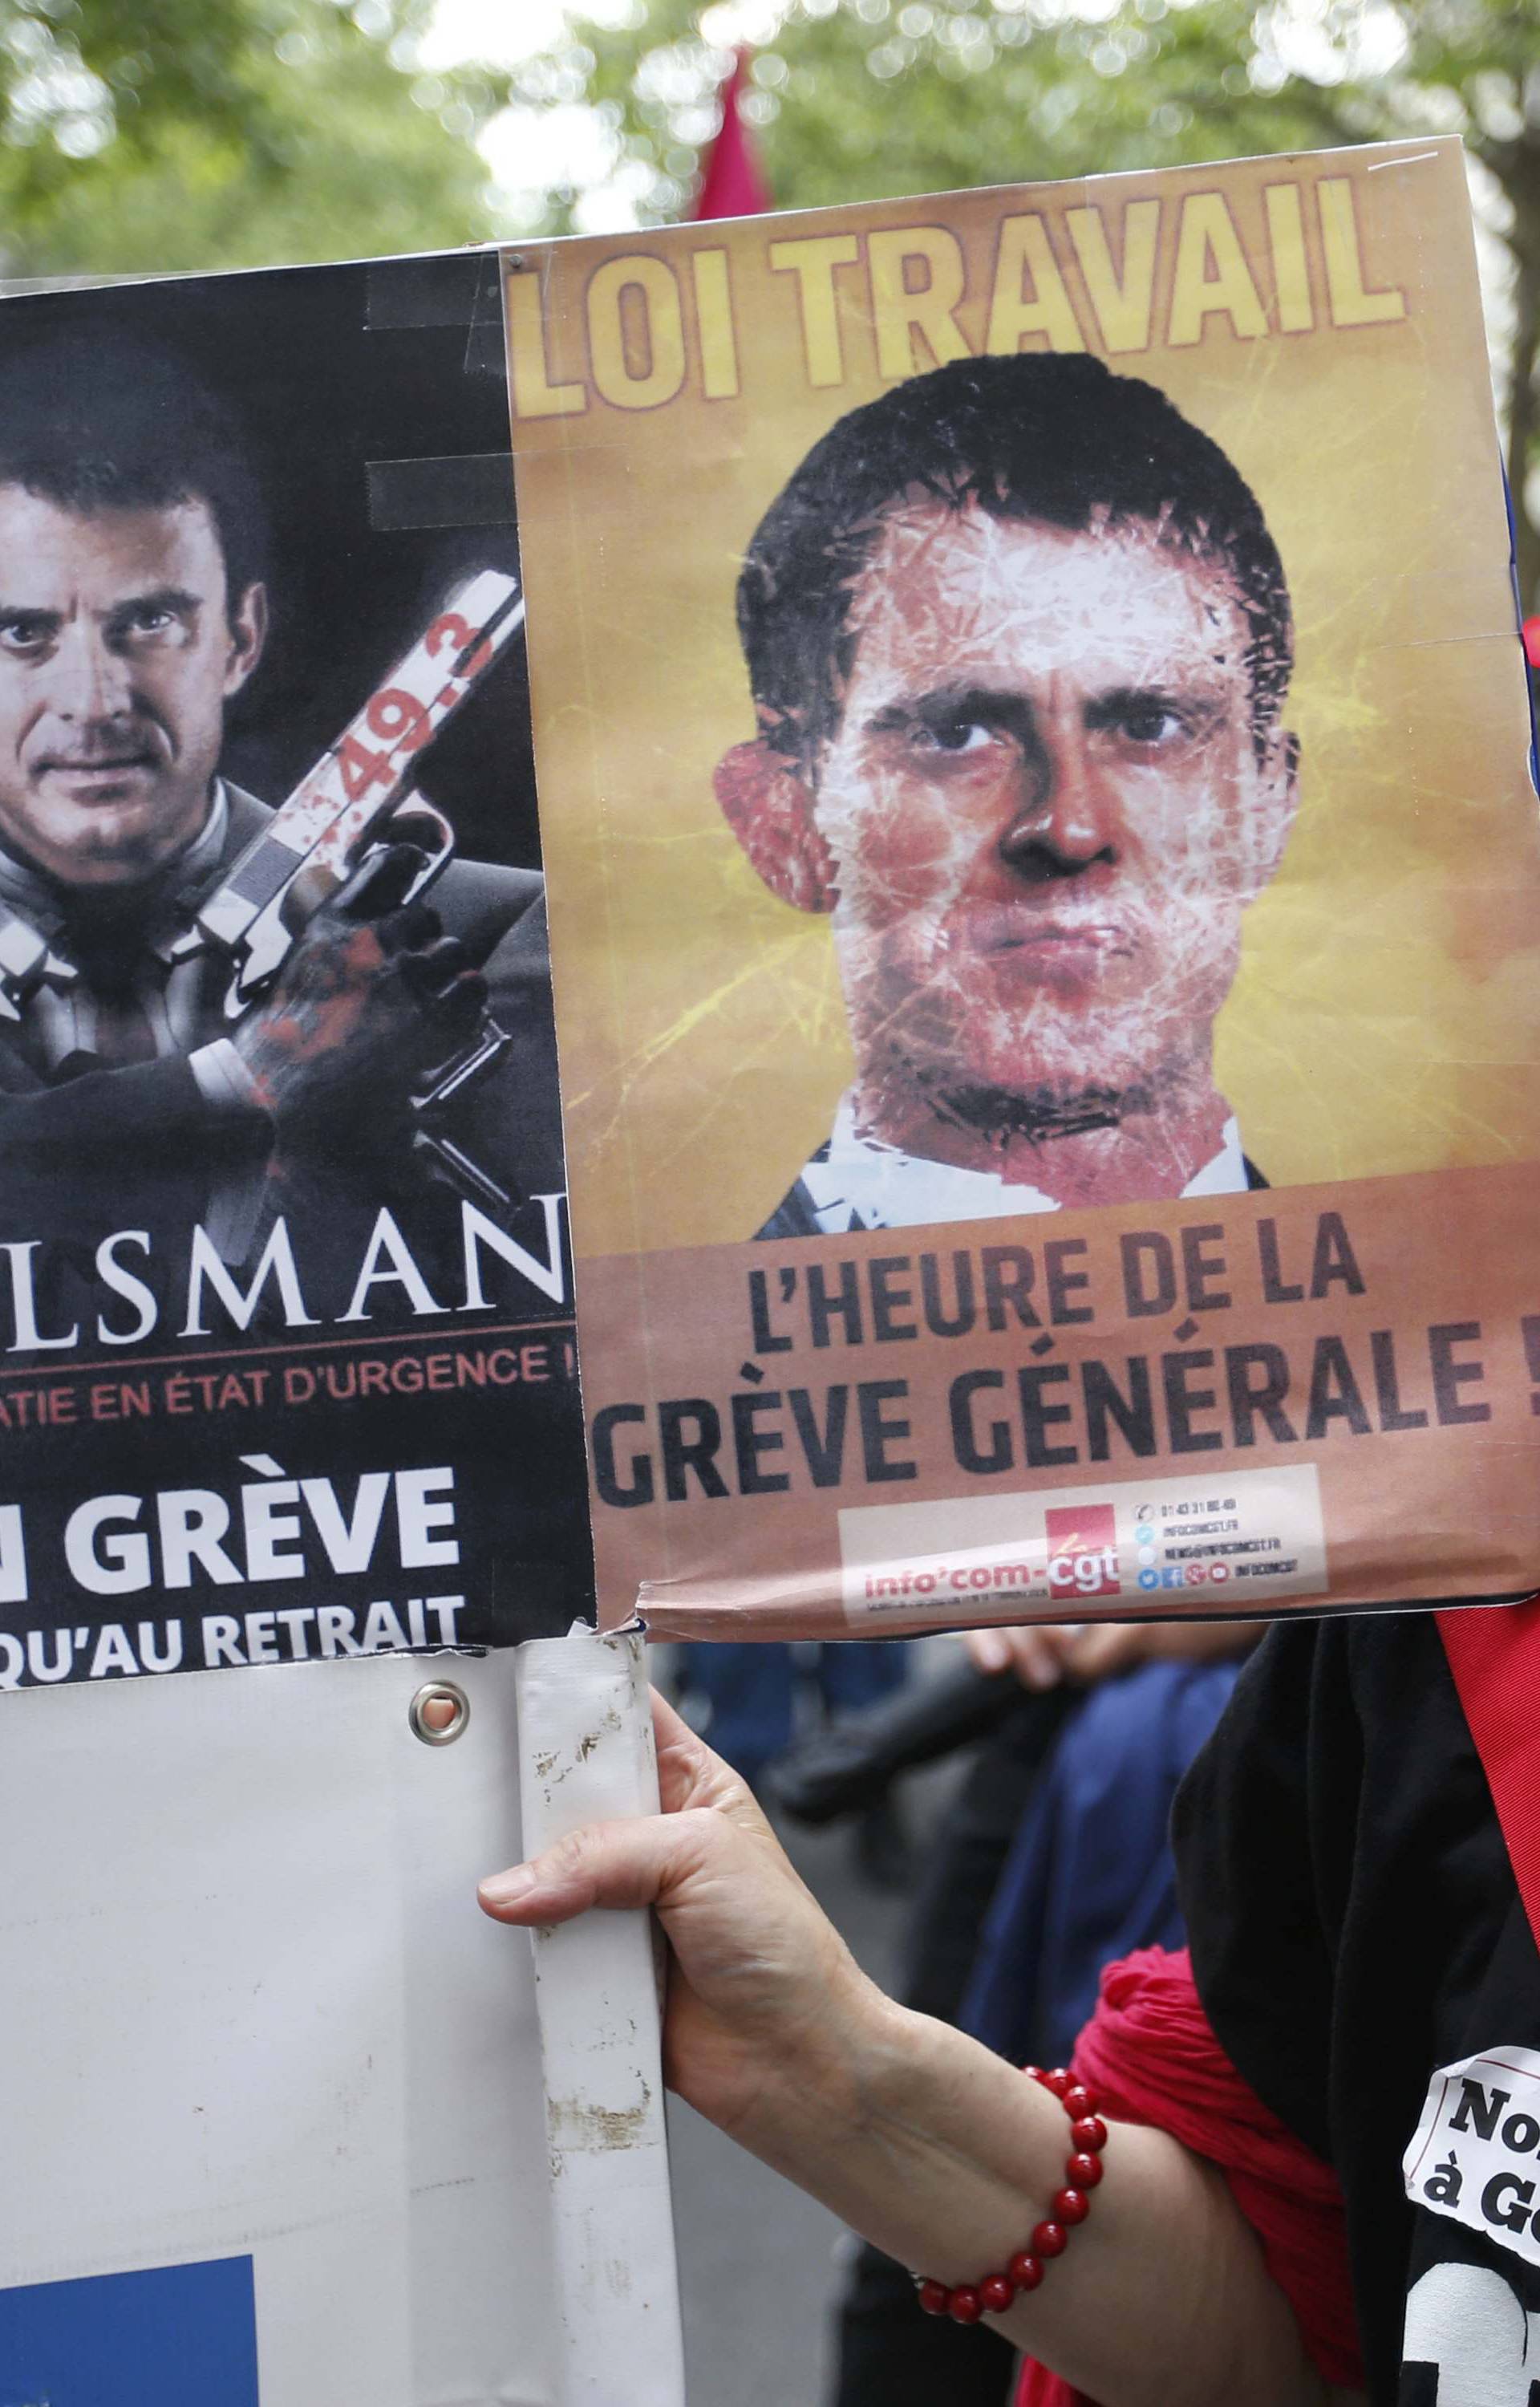 A French labour union member marches with a message critical of French prime minister during a demonstration in protest of the government's proposed labor law reforms in Paris